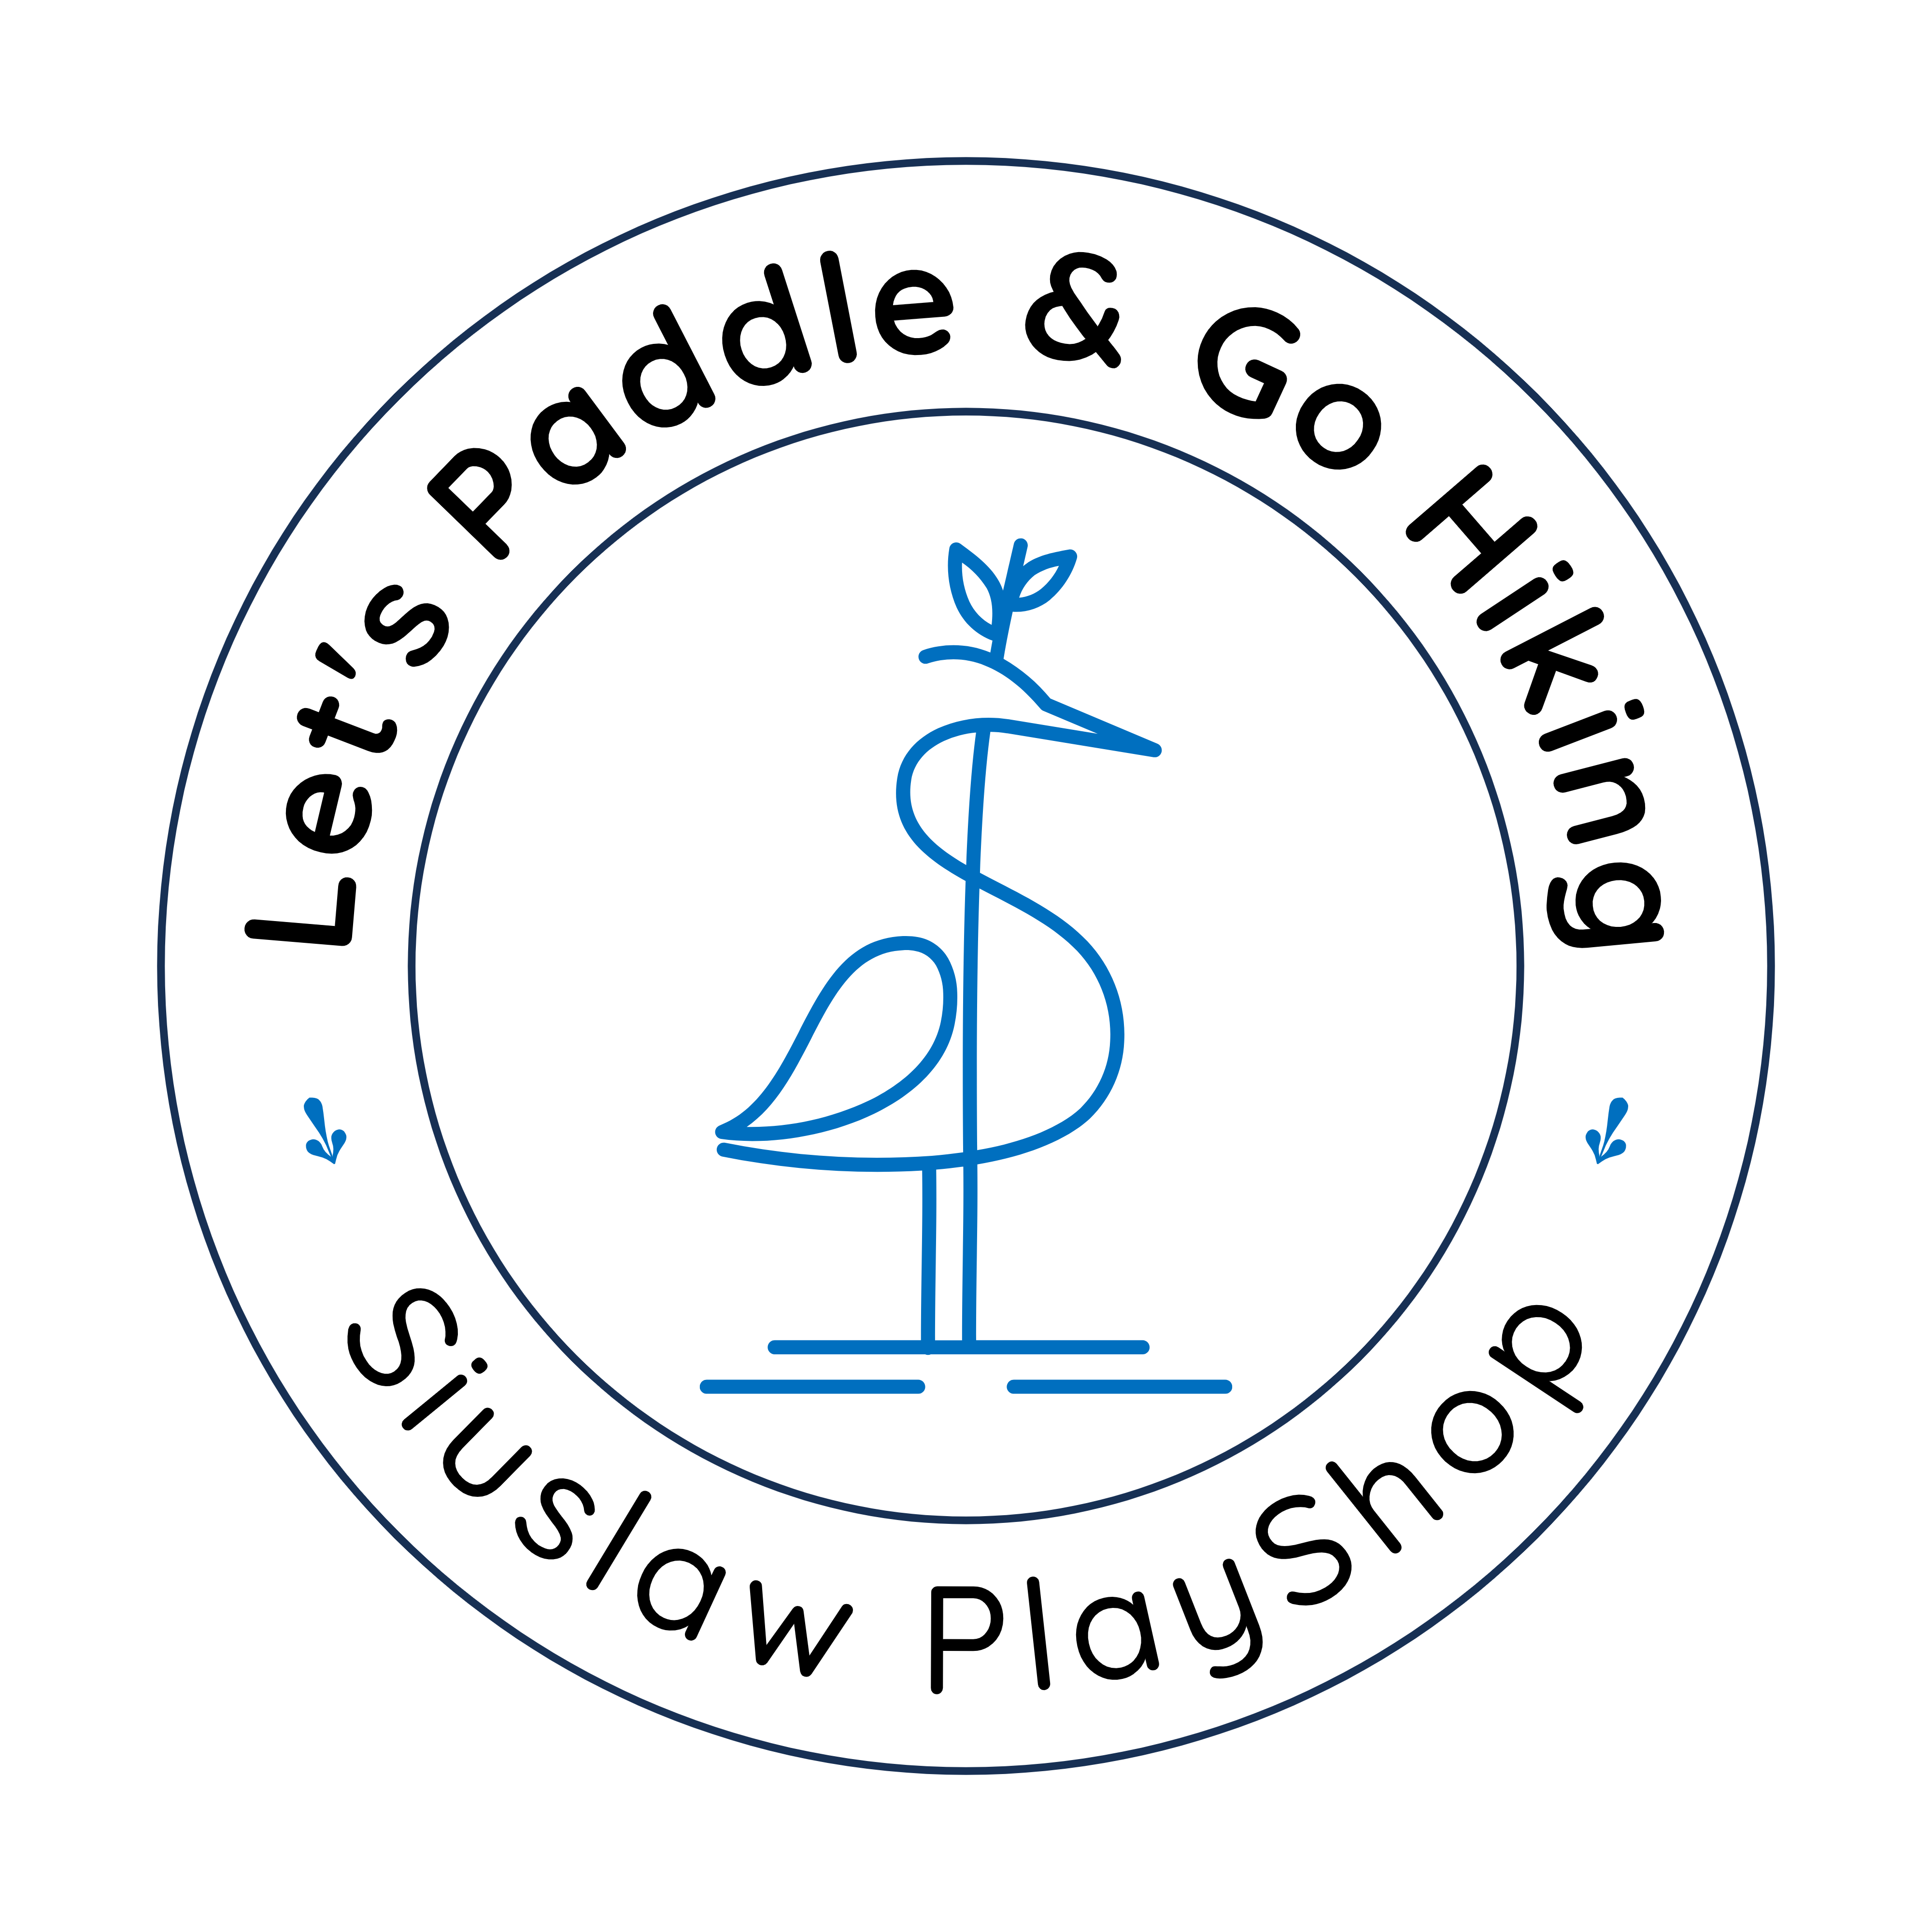 Let's Paddle & Go Hiking logo with blue heron